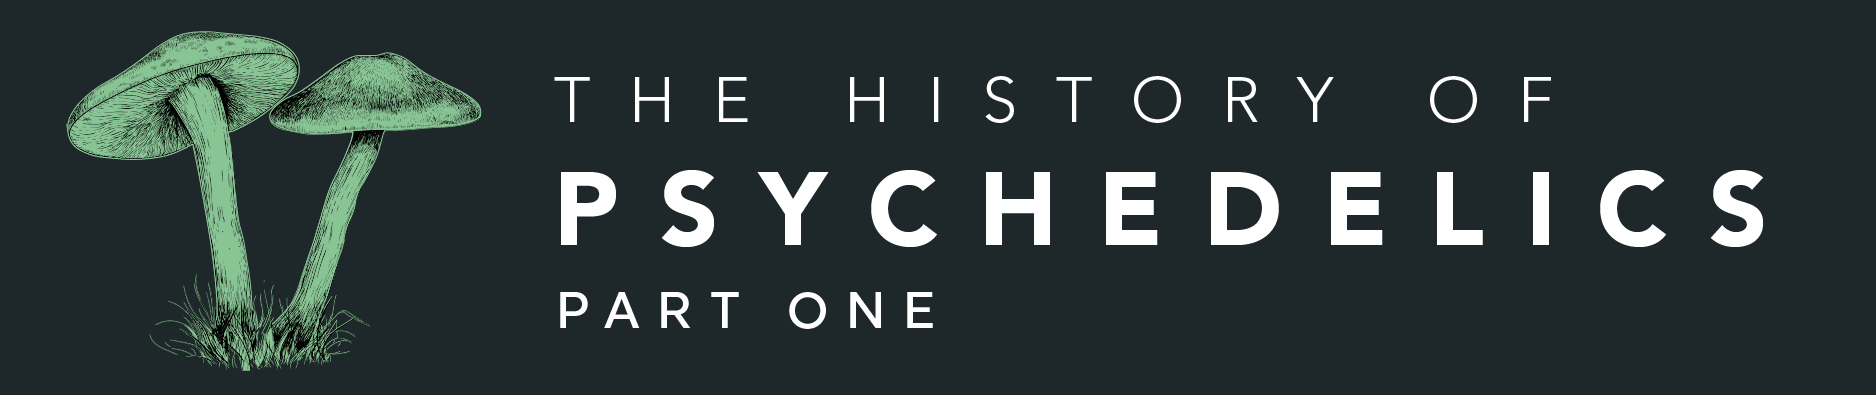 History of psychedelics Part 1 of 2